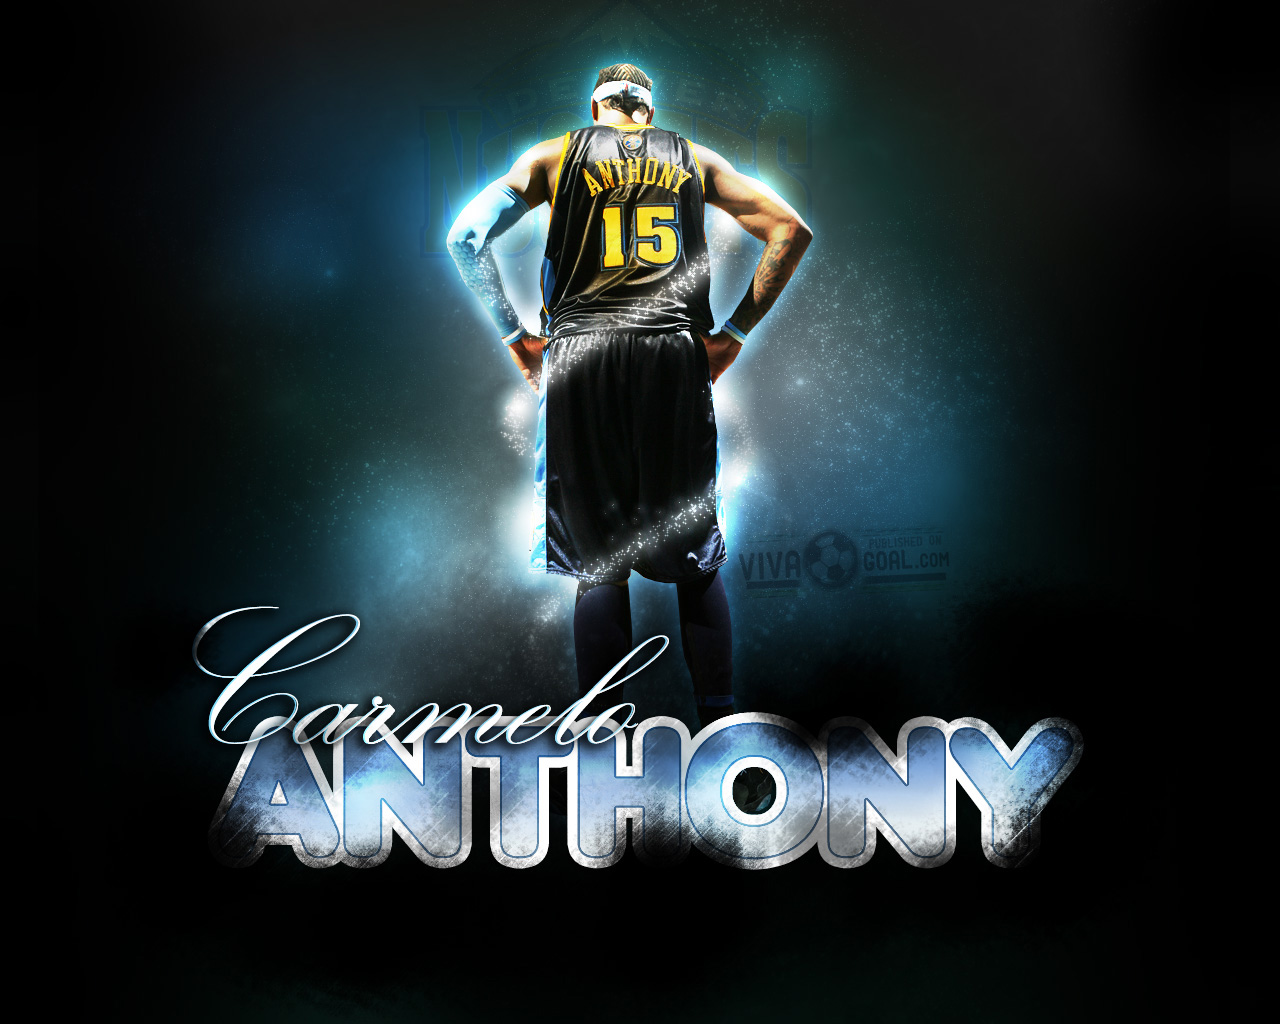 Carmelo Anthony Basketball Wallpapers | Carmelo Anthony NBA Wallpapers | NBA Wallpapers1280 x 1024